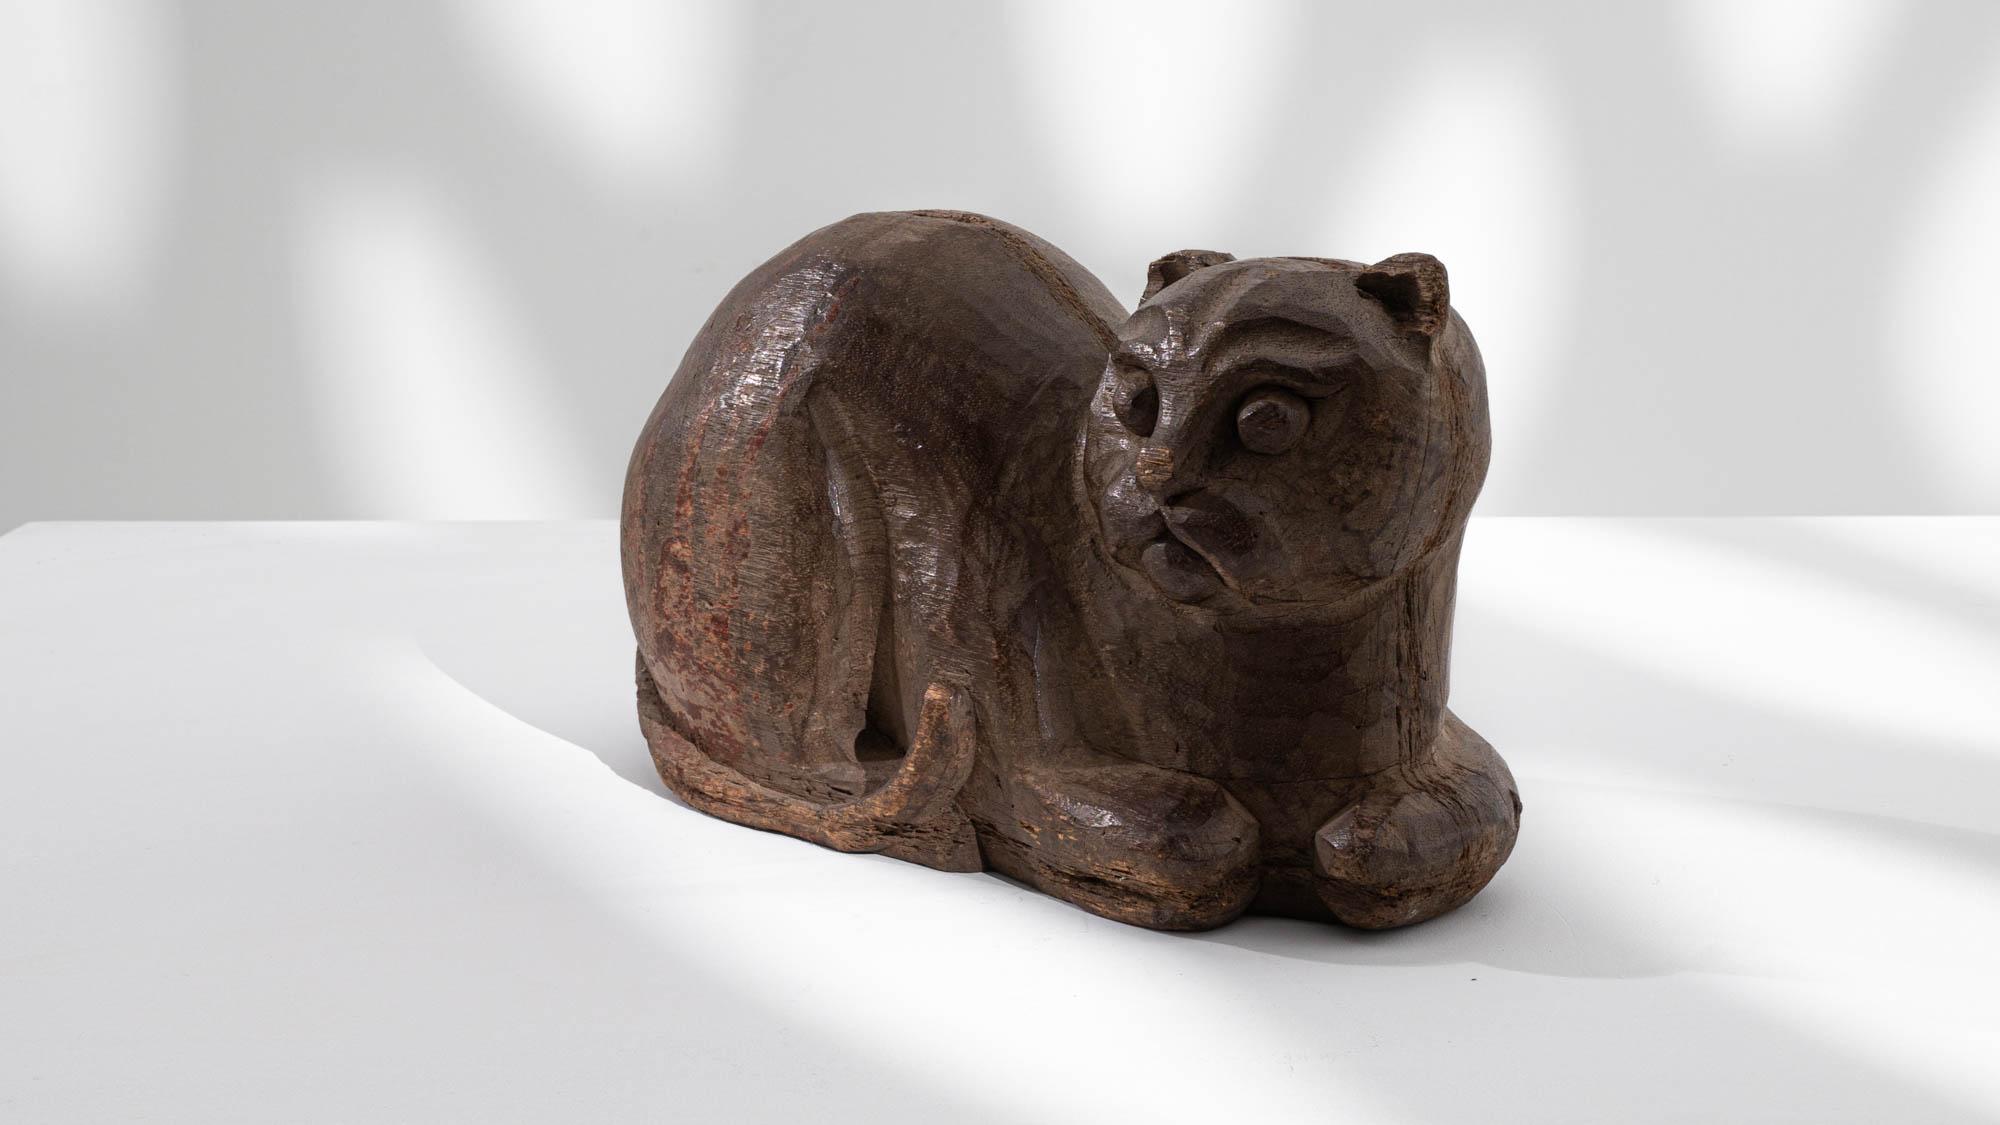 Gracefully poised in a sphinx position, this 20th-century French Carved Wooden Cat Decoration captivates with its arched back and distinct facial features. The intricately carved round face and well-defined mouth lend a unique charm to this vintage